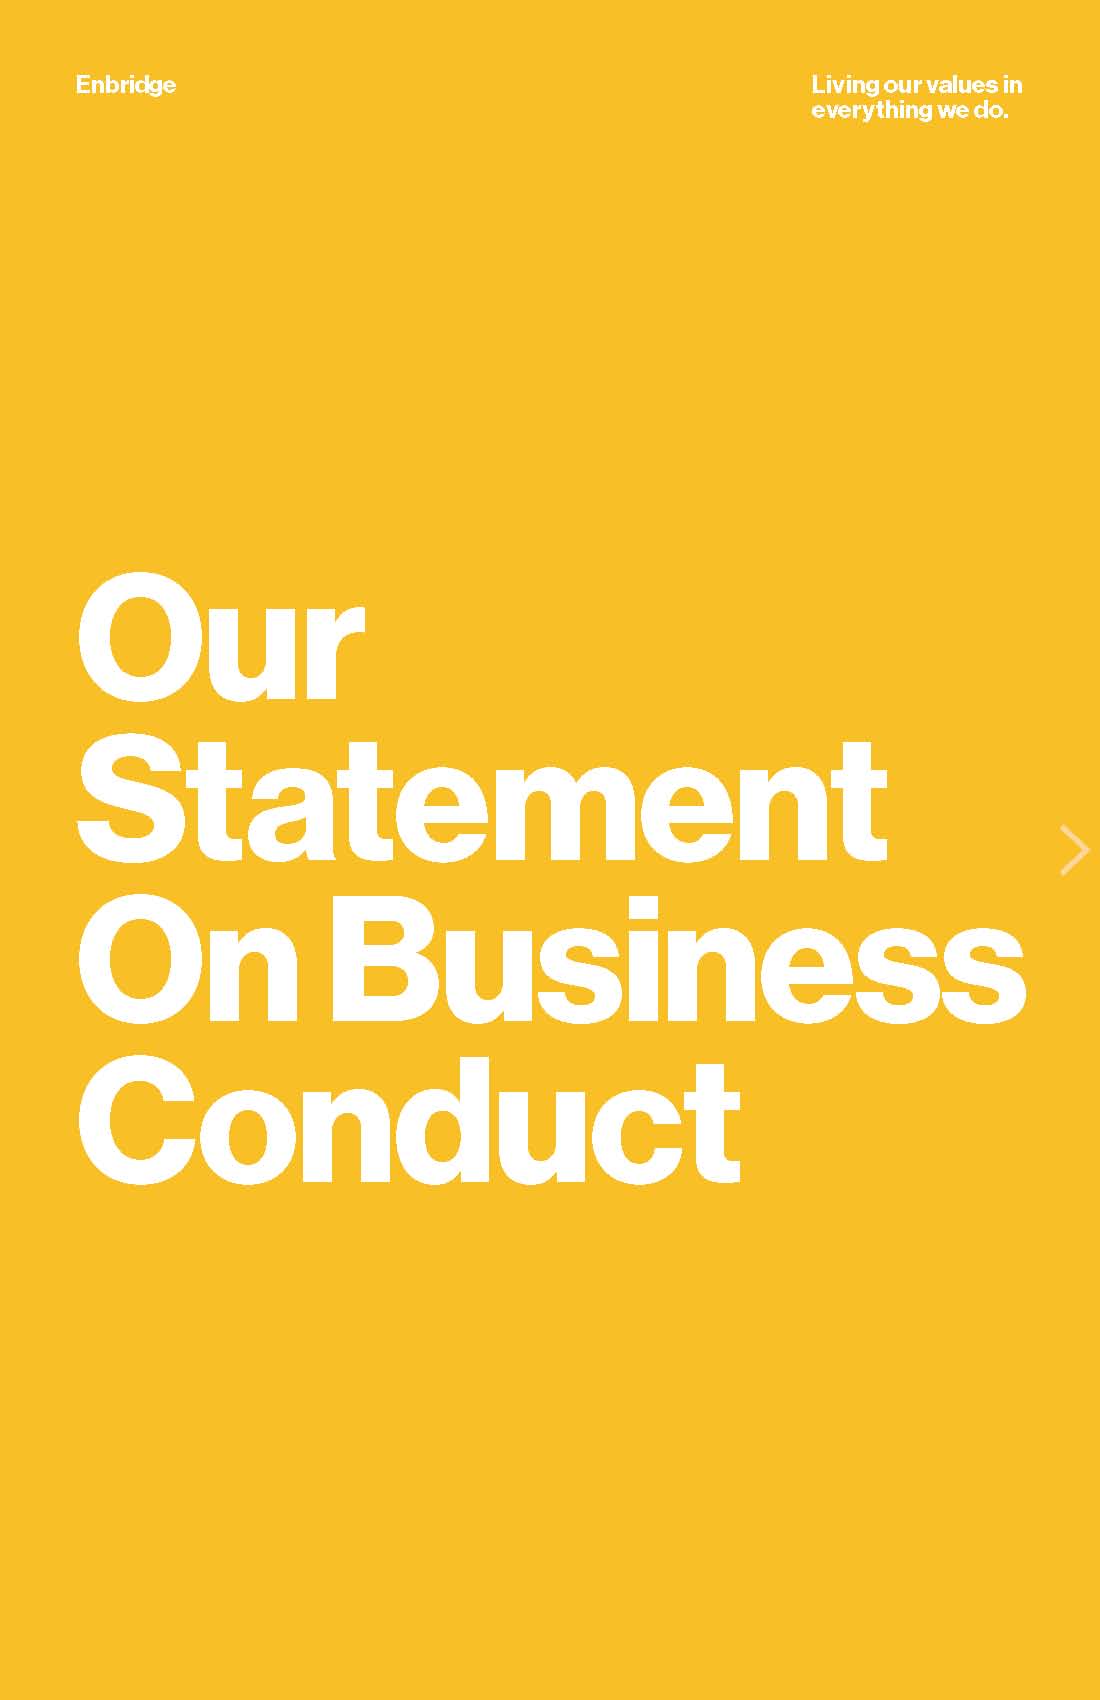 Statement on Business Conduct